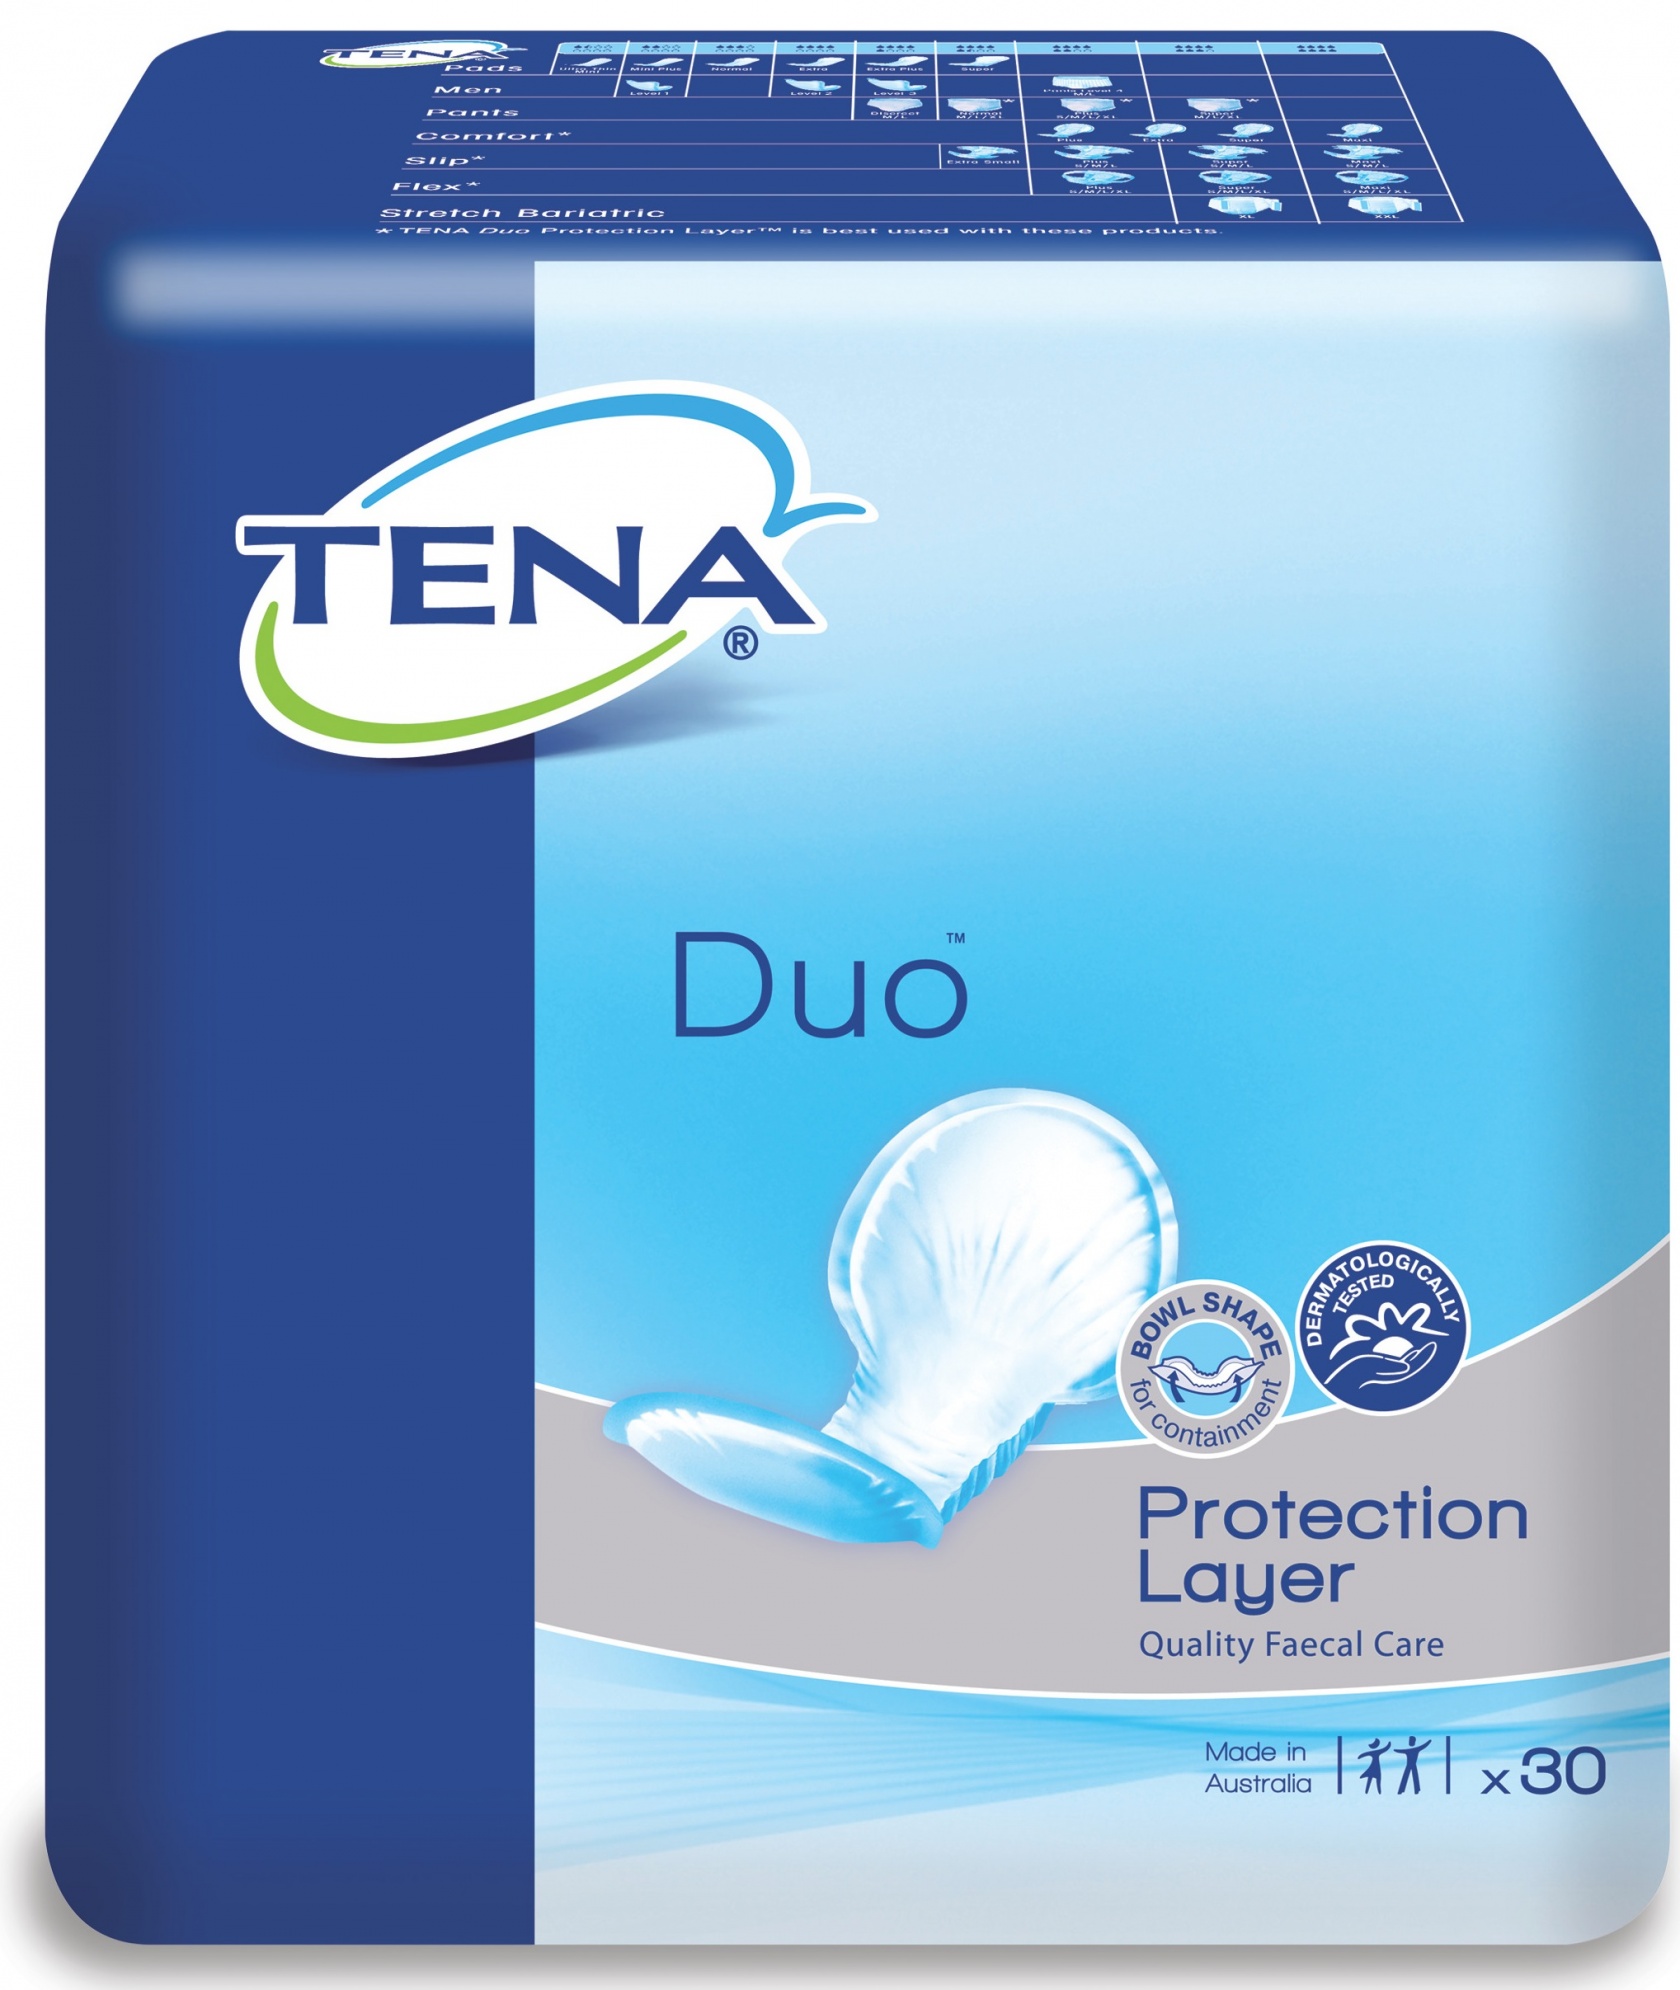 TENA Duo Protection Layer image 0